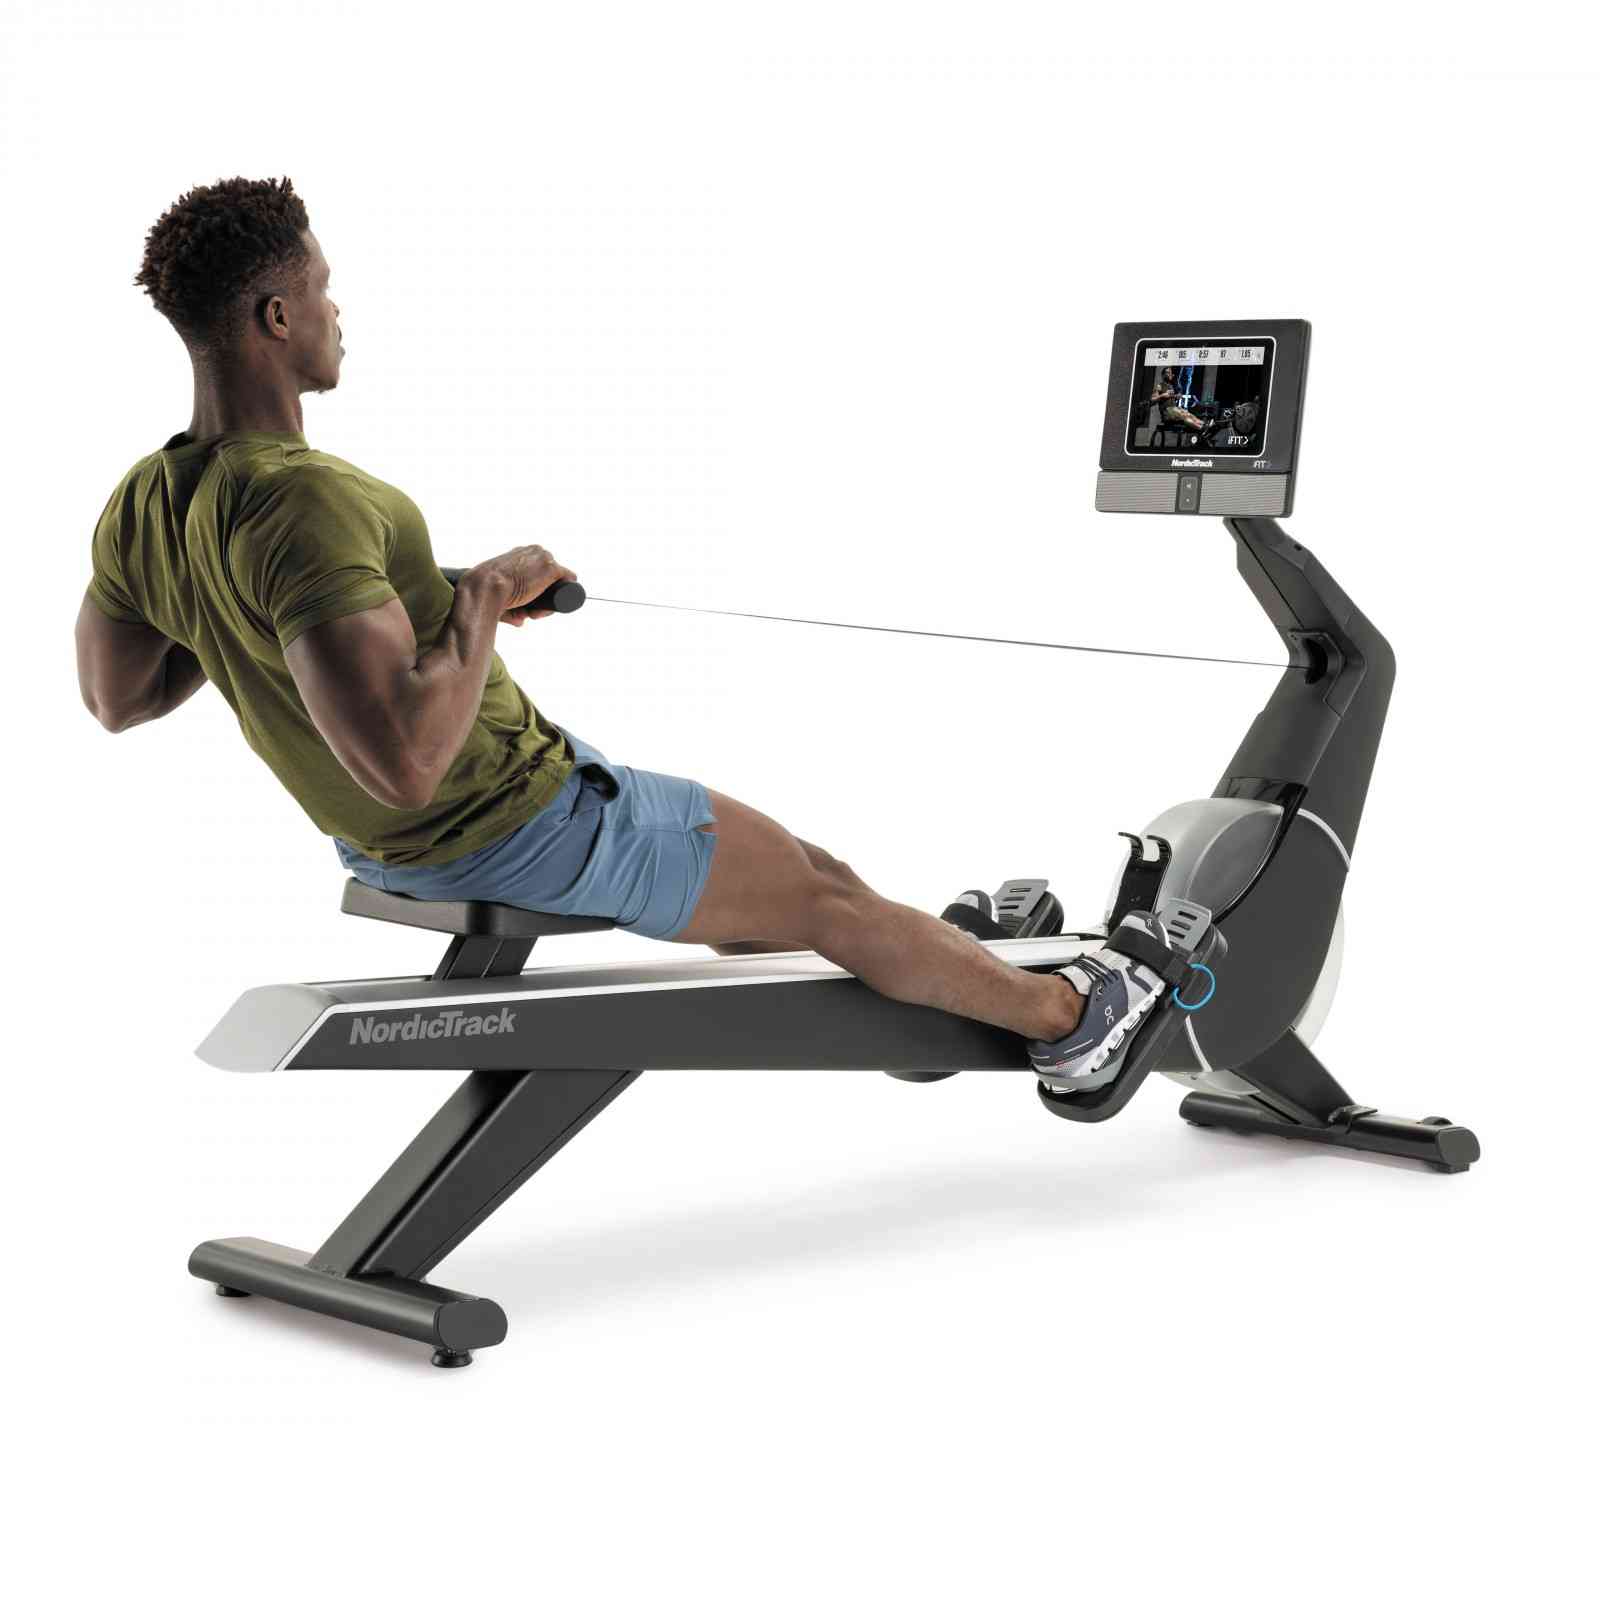 Buy NordicTrack New Rower RW700 Online at Best Price in Oman.